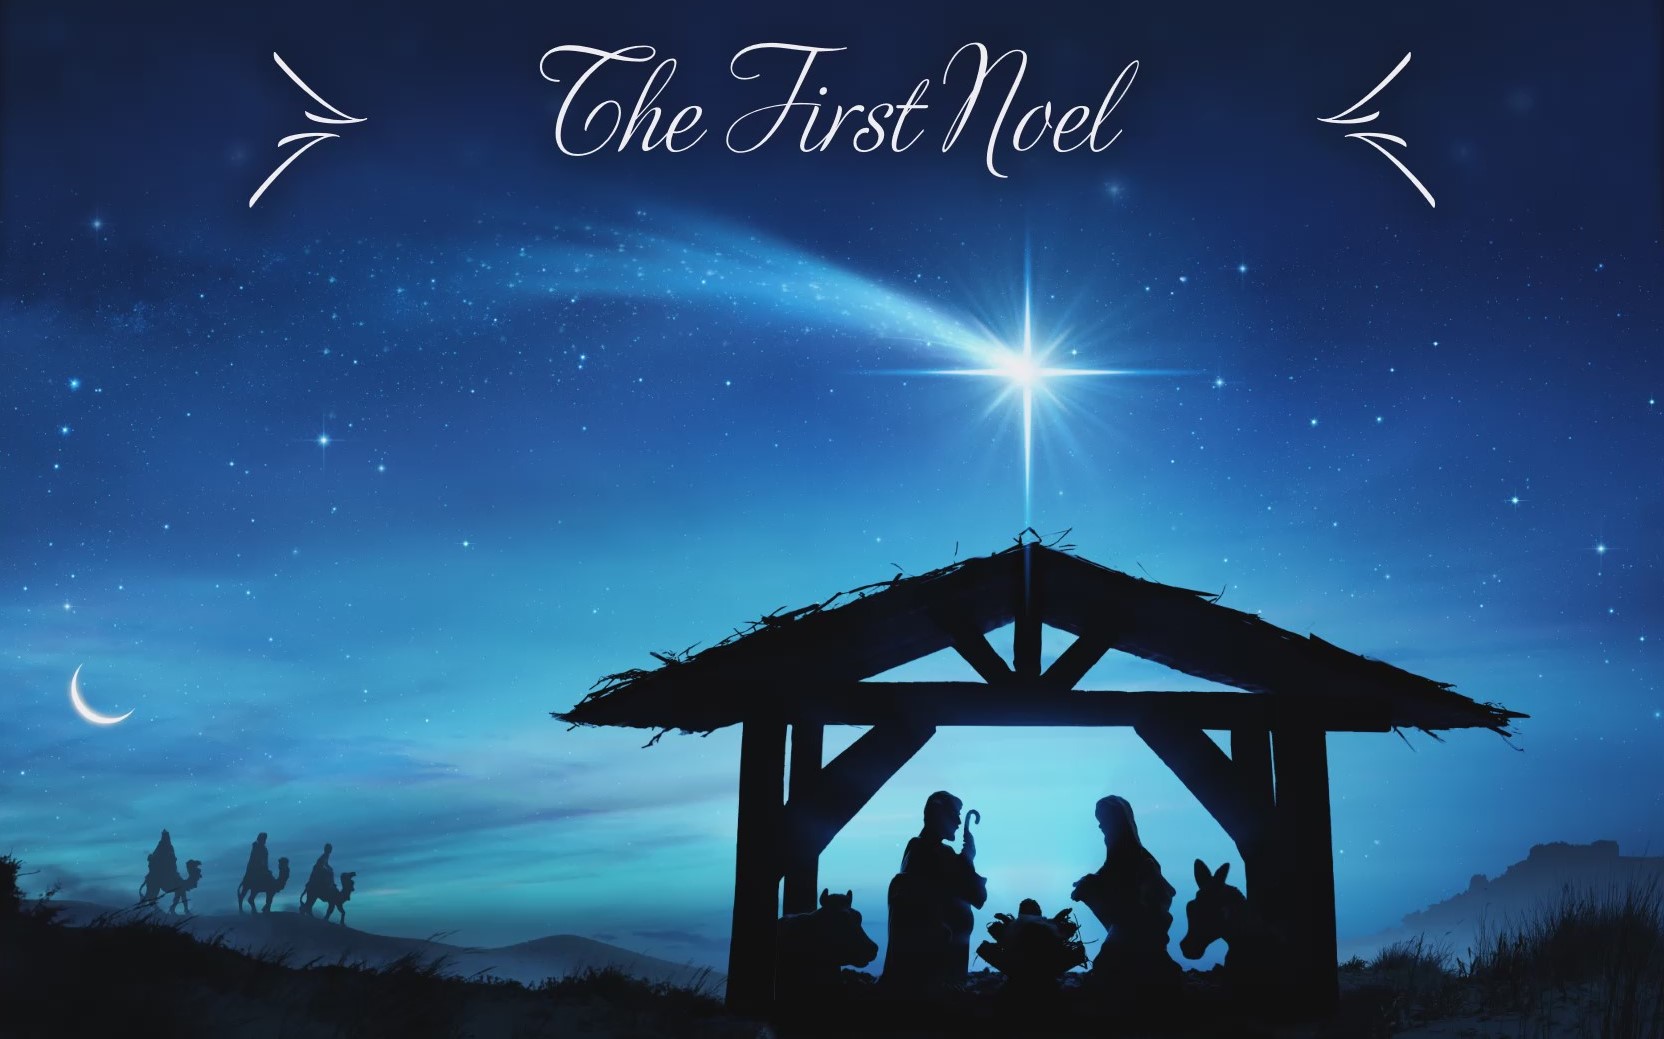 The Christmas Homily – The First Noel